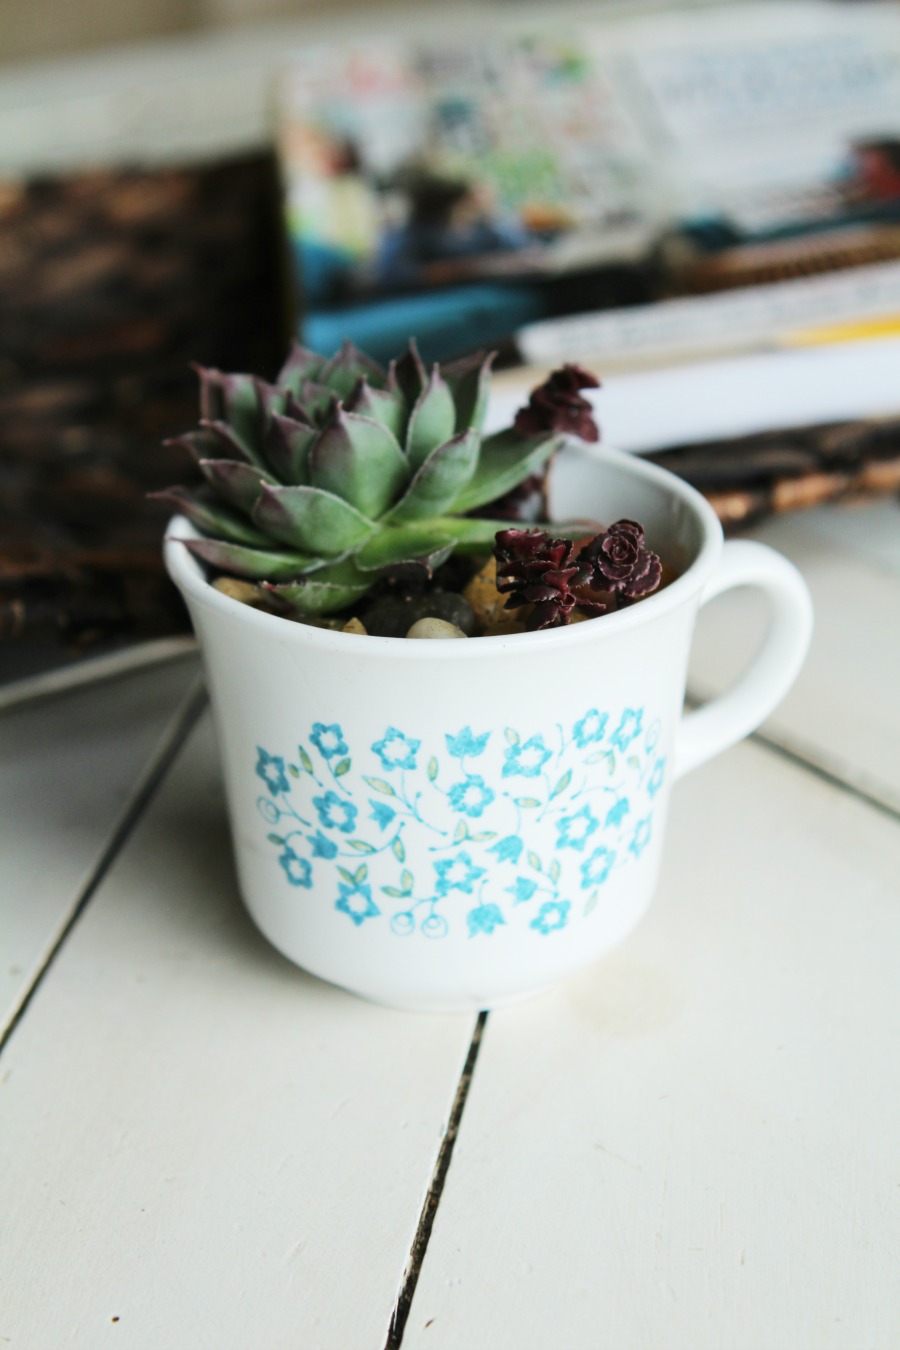 Have a black thumb? Turn your black thumb to green with succulents! Seriously! These things are so easy to grow. Low maintenance plants that look pretty? Bonus! Check out this adorable DIY Succulent Teacup Planter. They are the perfect little handmade gift idea for Mother's Day, teacher's gifts, neighbor gifts, Valentine's gifts, party/shower favors and thank you gifts! #Succulents #gardening #handmadegifts #thrifting